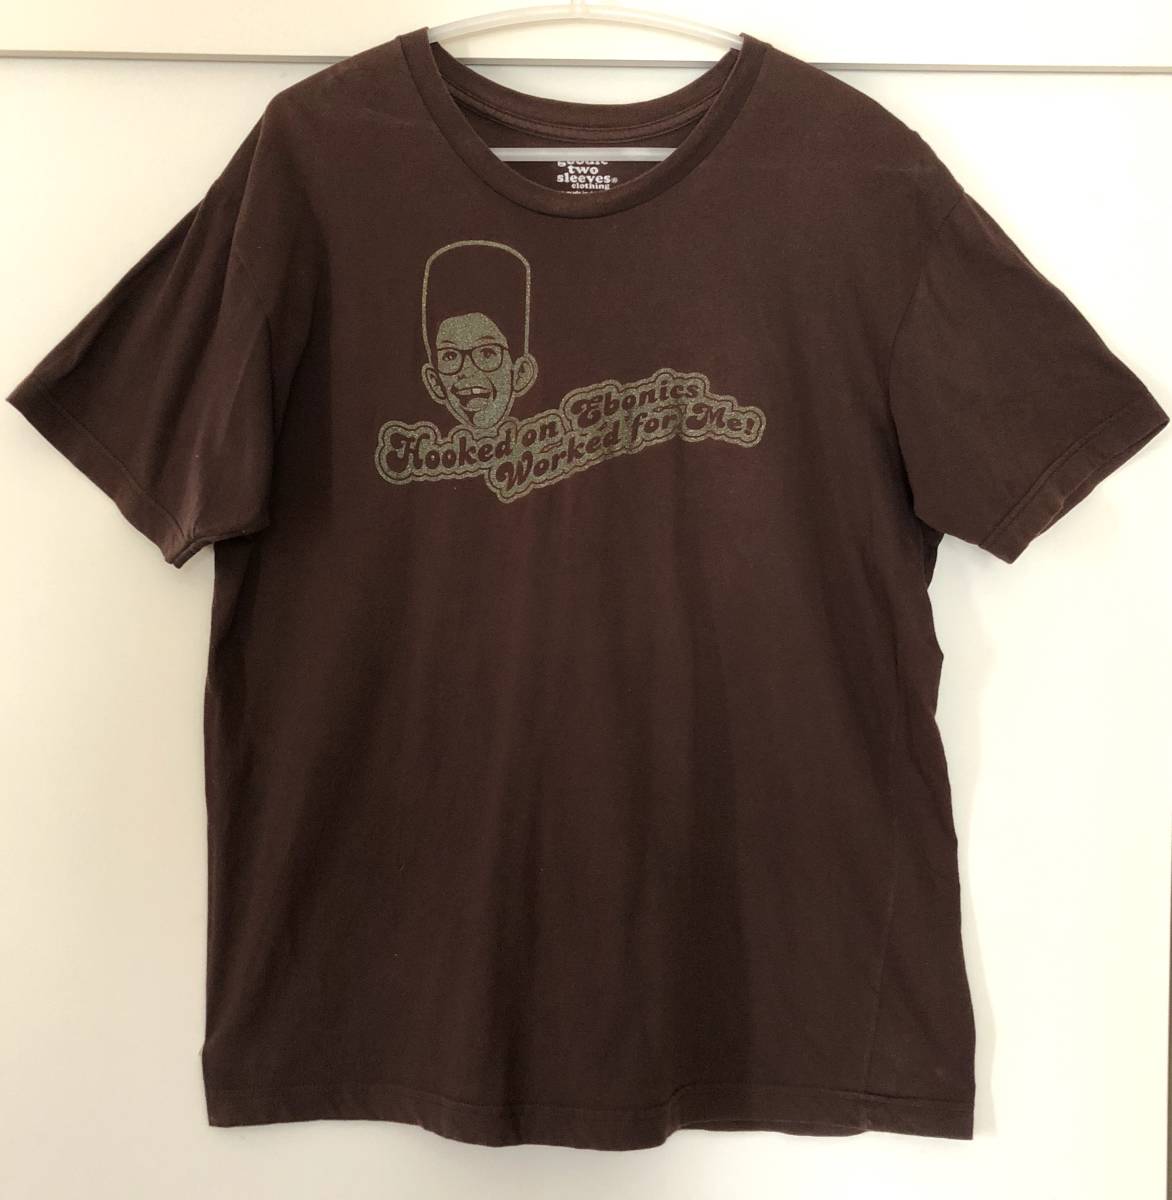 ★goodie two sleeves clothing ファンキー ラメ Tシャツ_画像1